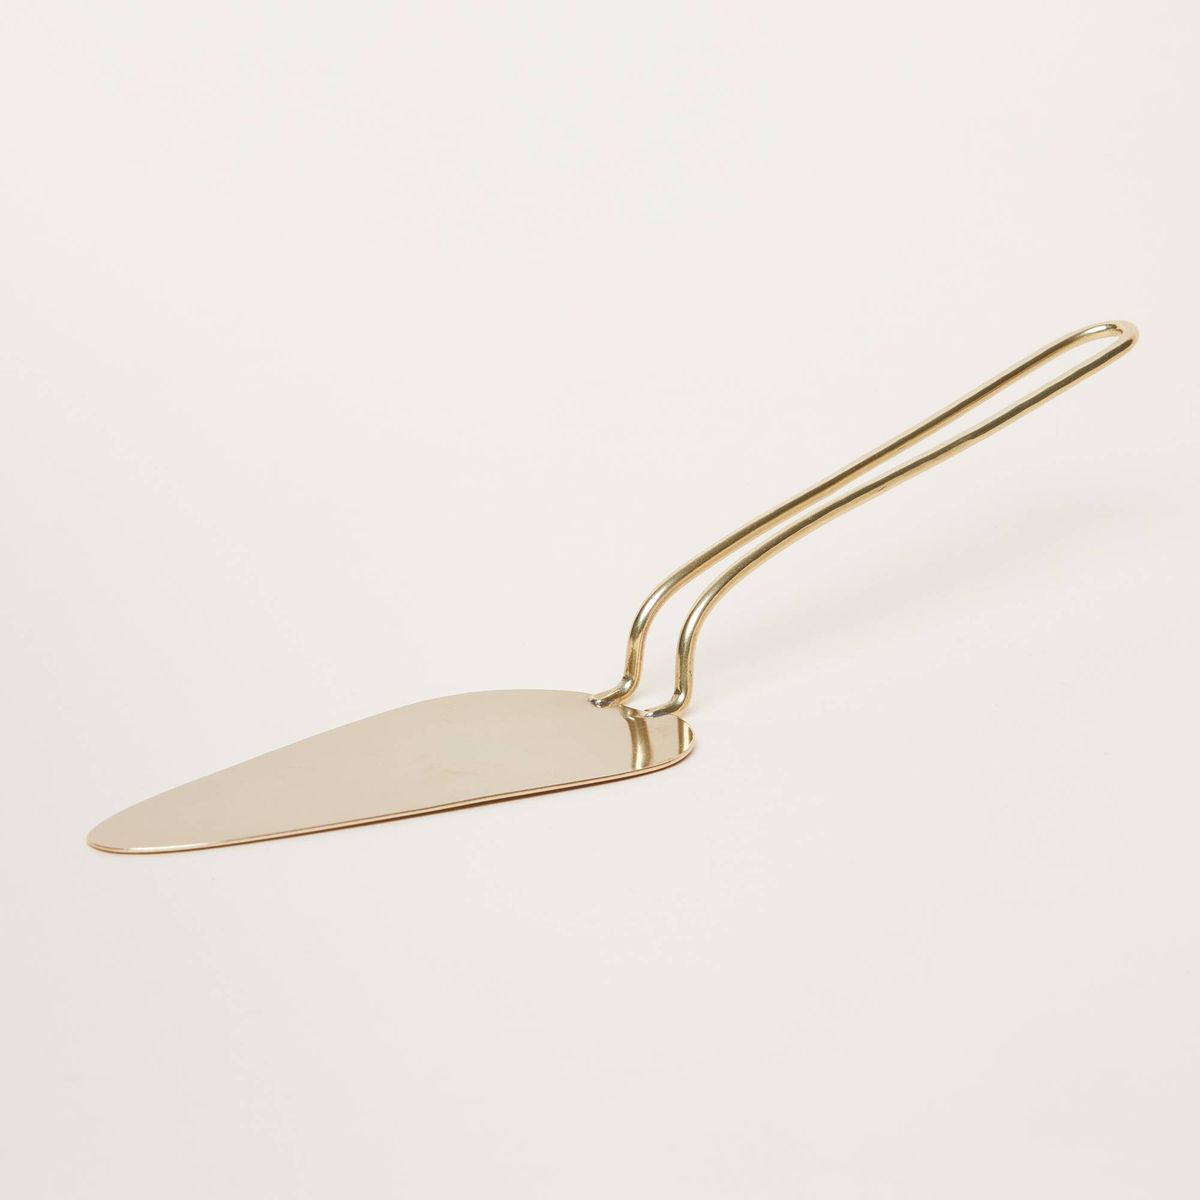 Crafted in brass, a triangular pie server has a long, thin loop of brass for a handle